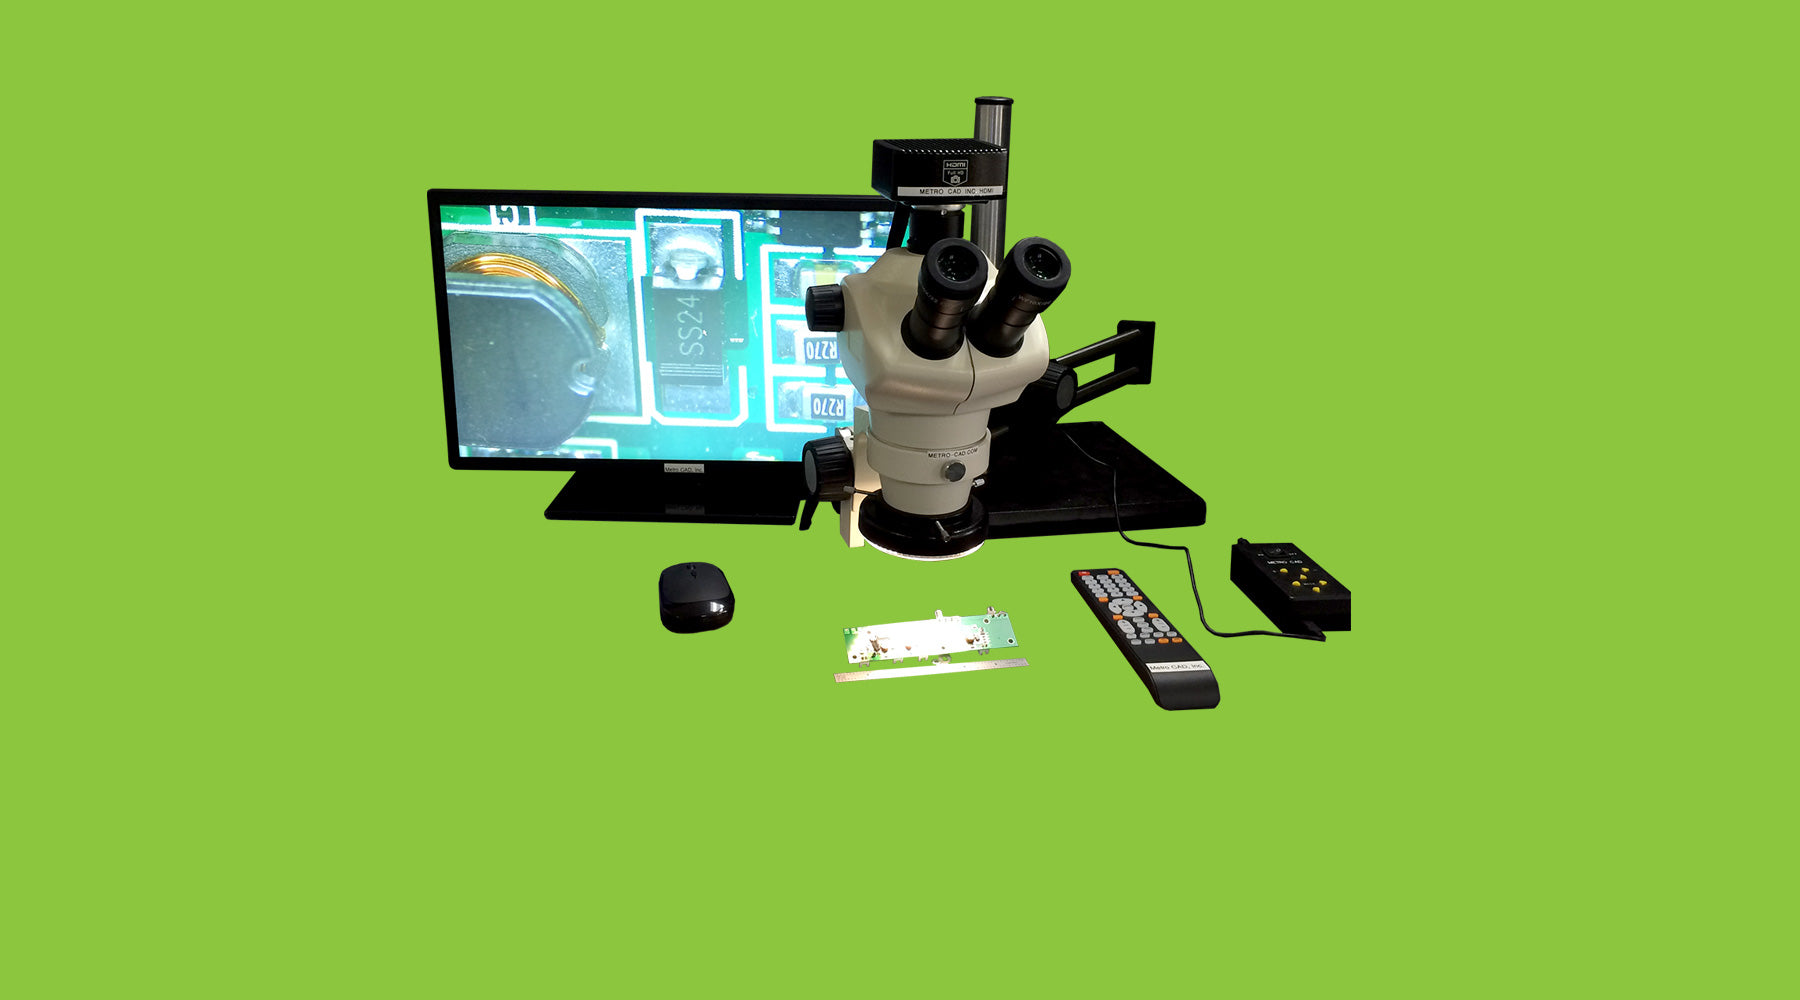 hdmi-microscope-camera-dual-arm-boom-stand-unit-16-mmbt-by-metro-cad